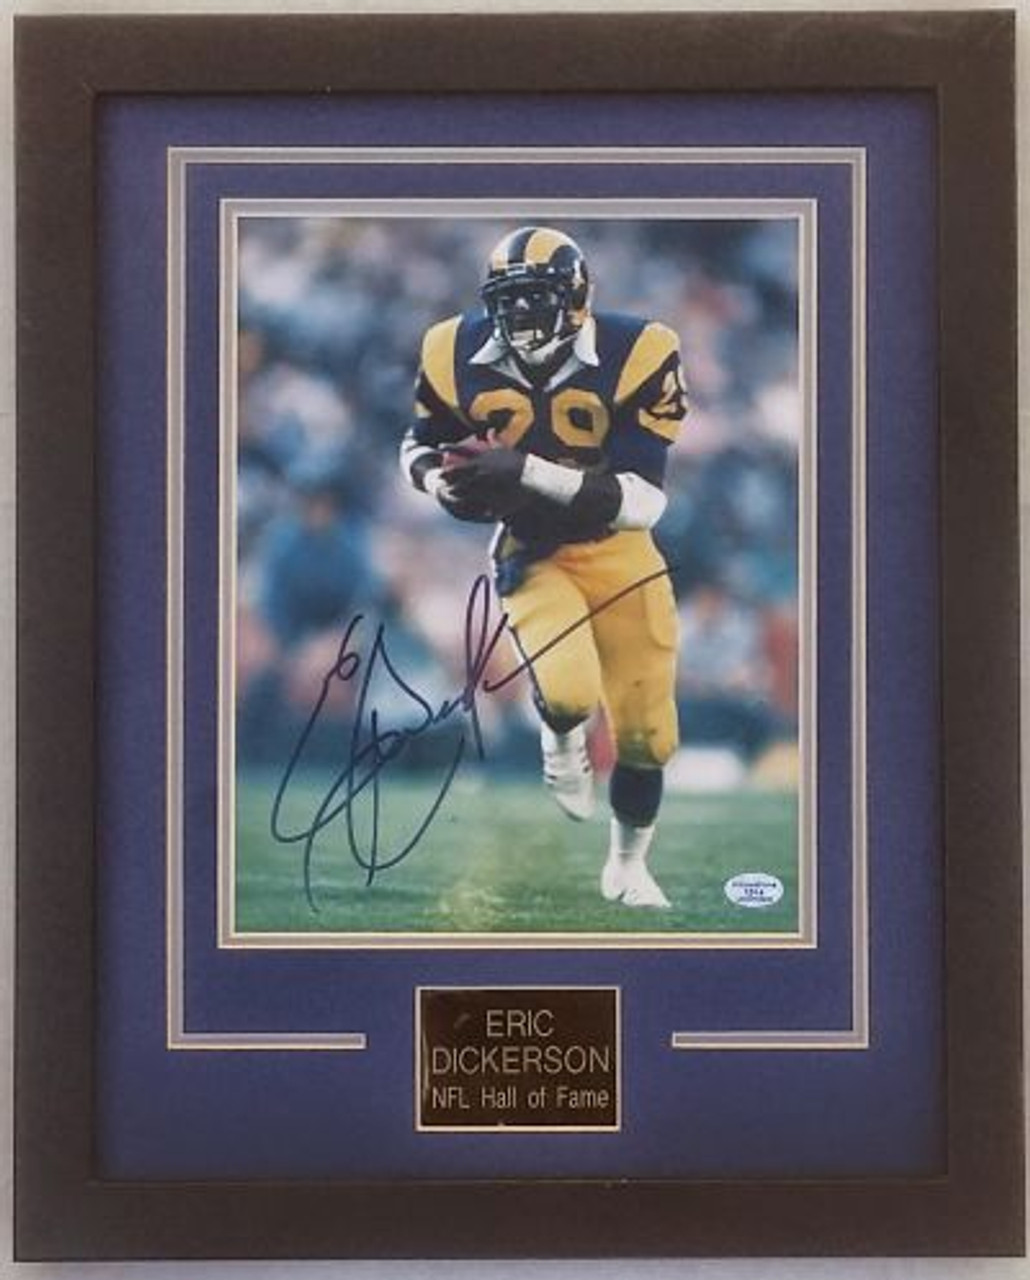 Eric Dickerson Los Angeles Rams Matted and Framed Autographed 8x10